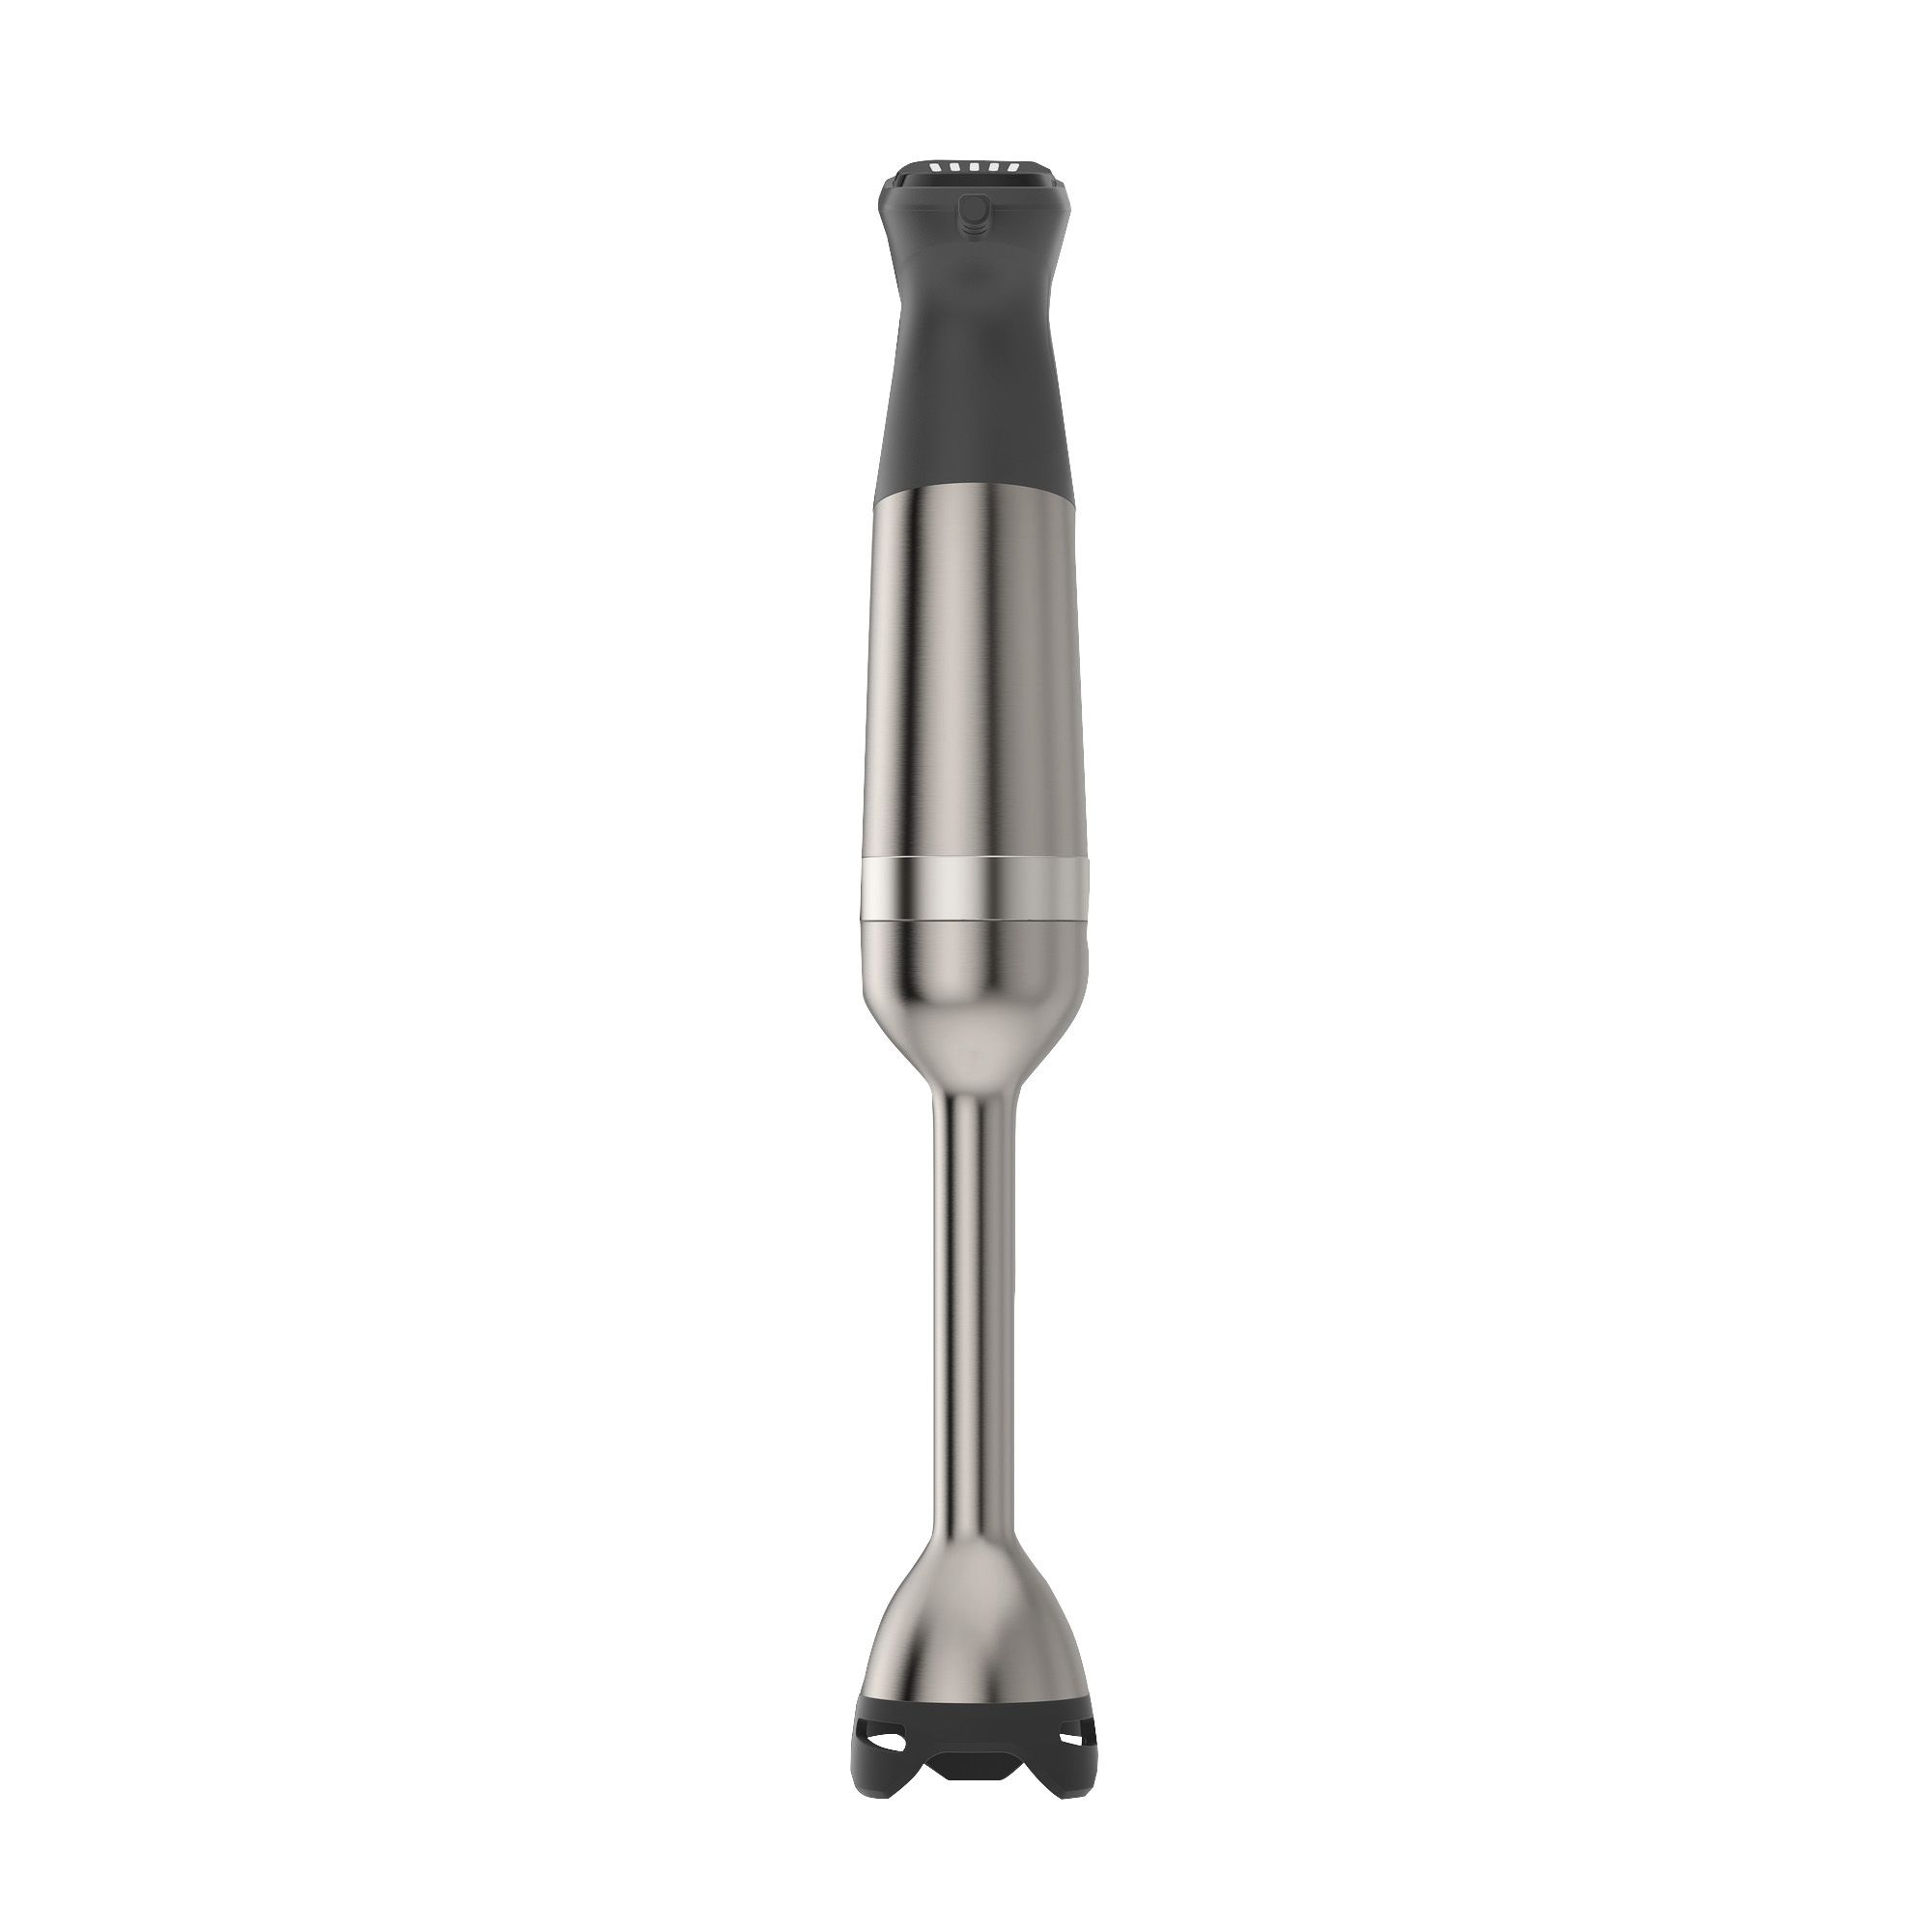 Chefman's cordless portable immersion blender upgrades your